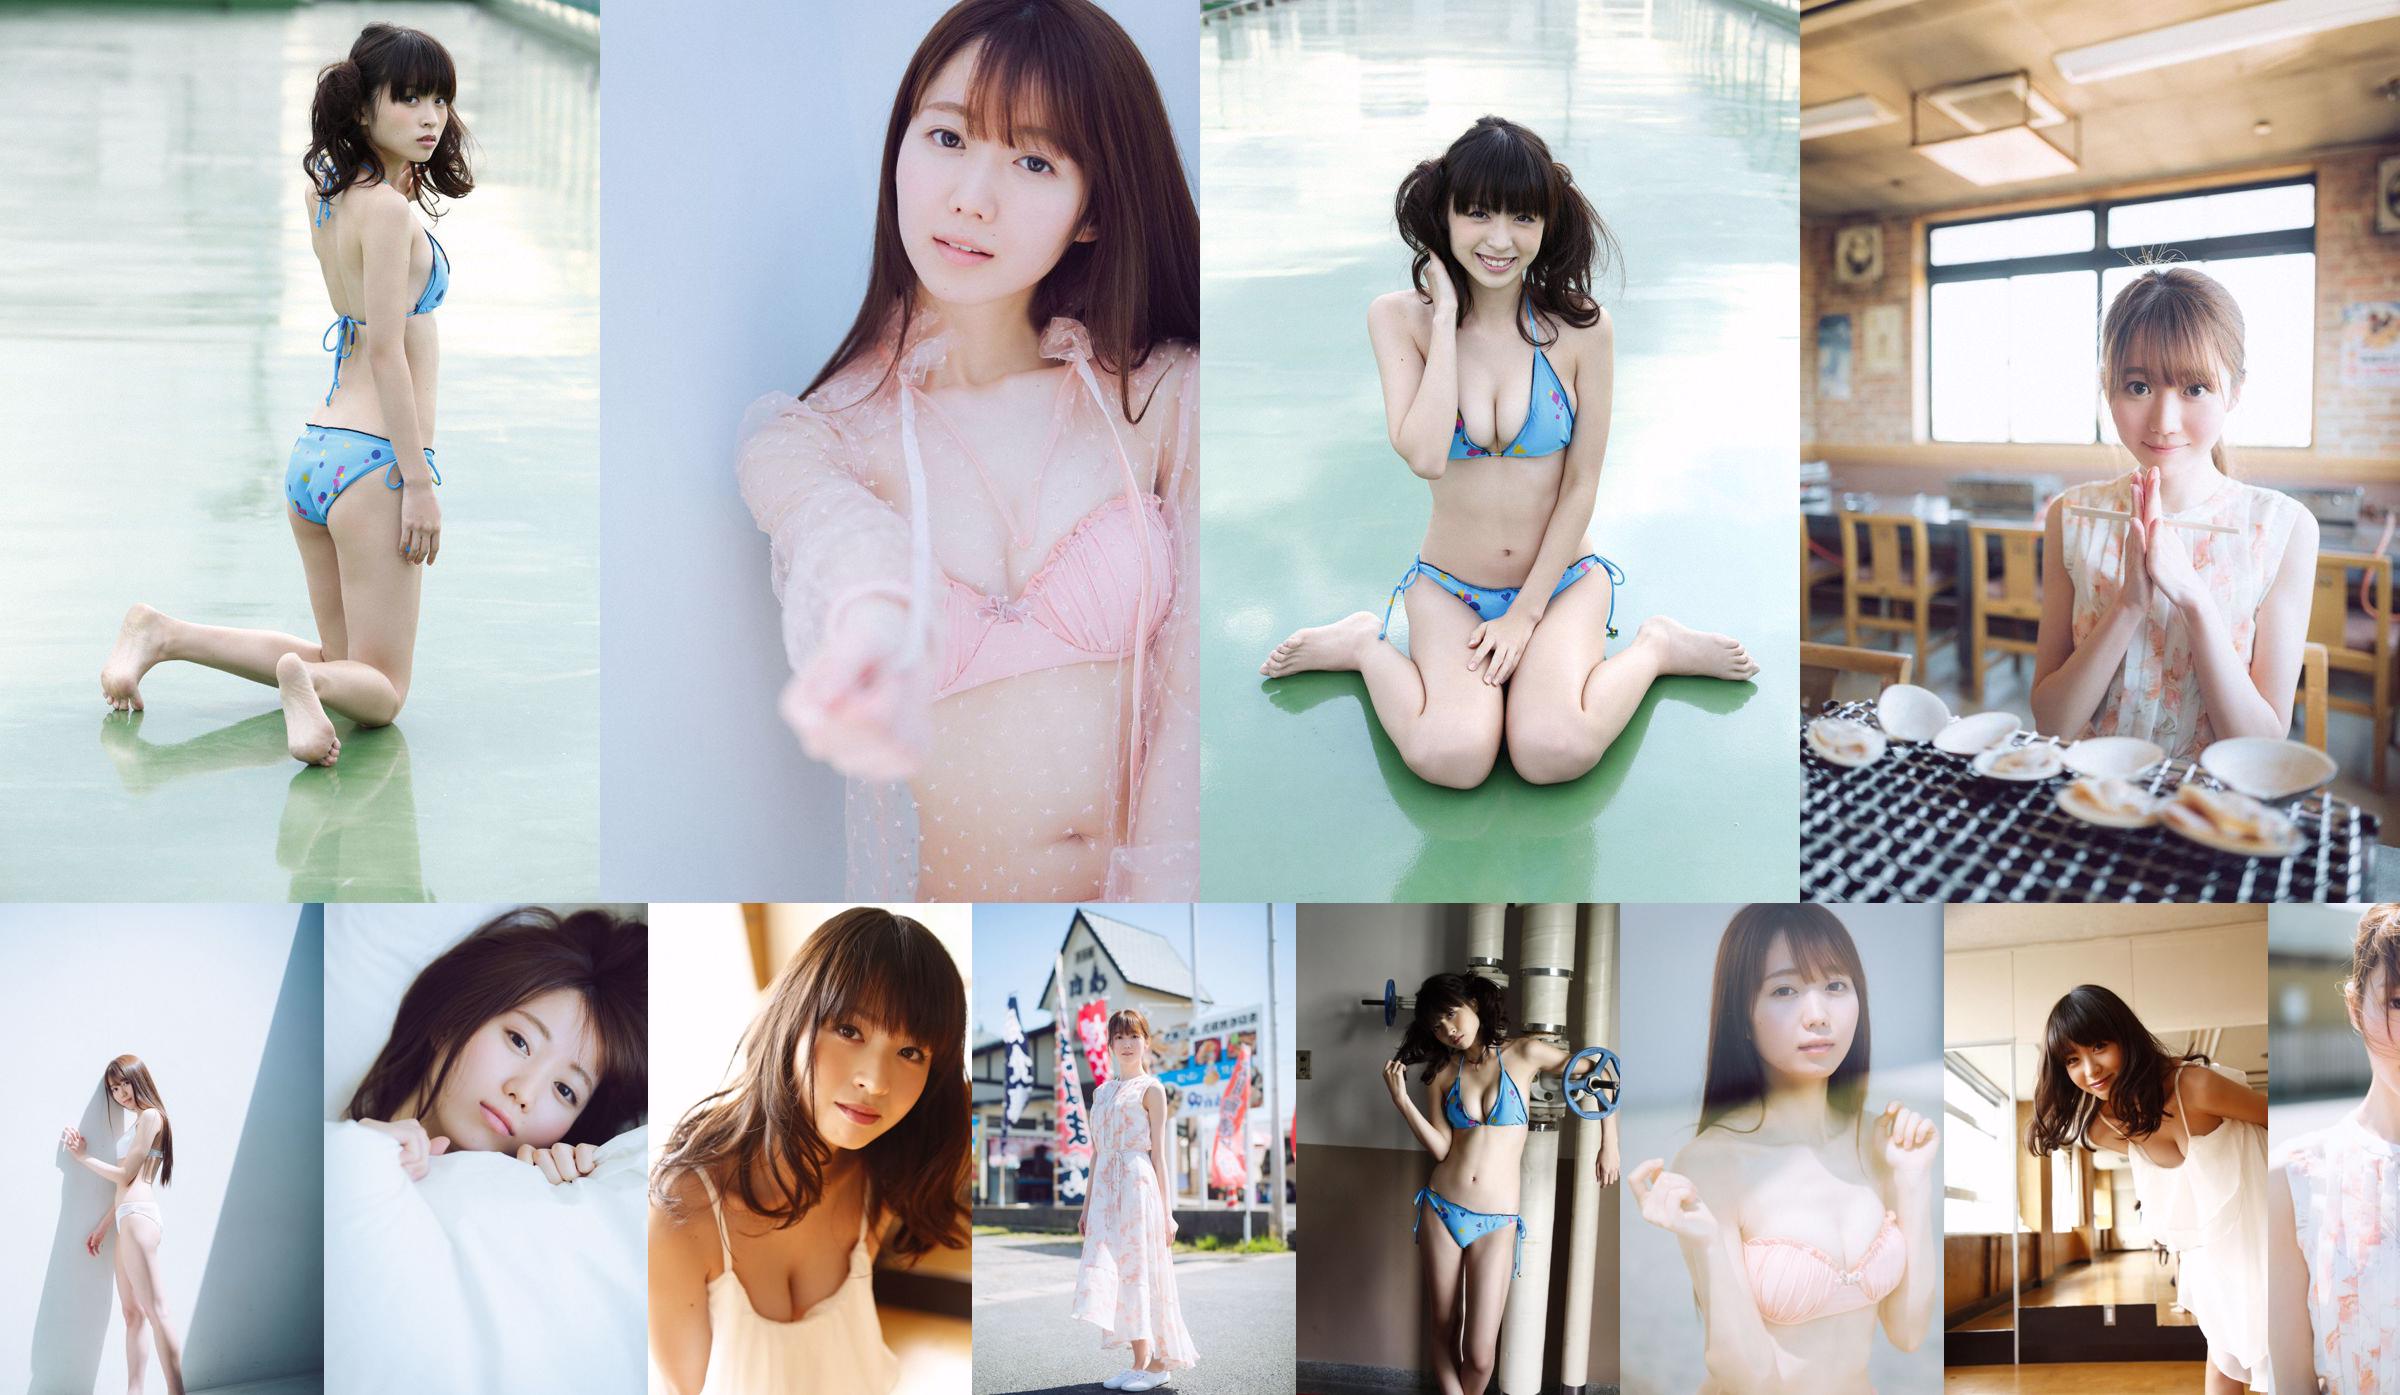 Emiri Otani "With you and two." [WPB-net] Extra734 No.a7a4f9 Page 1